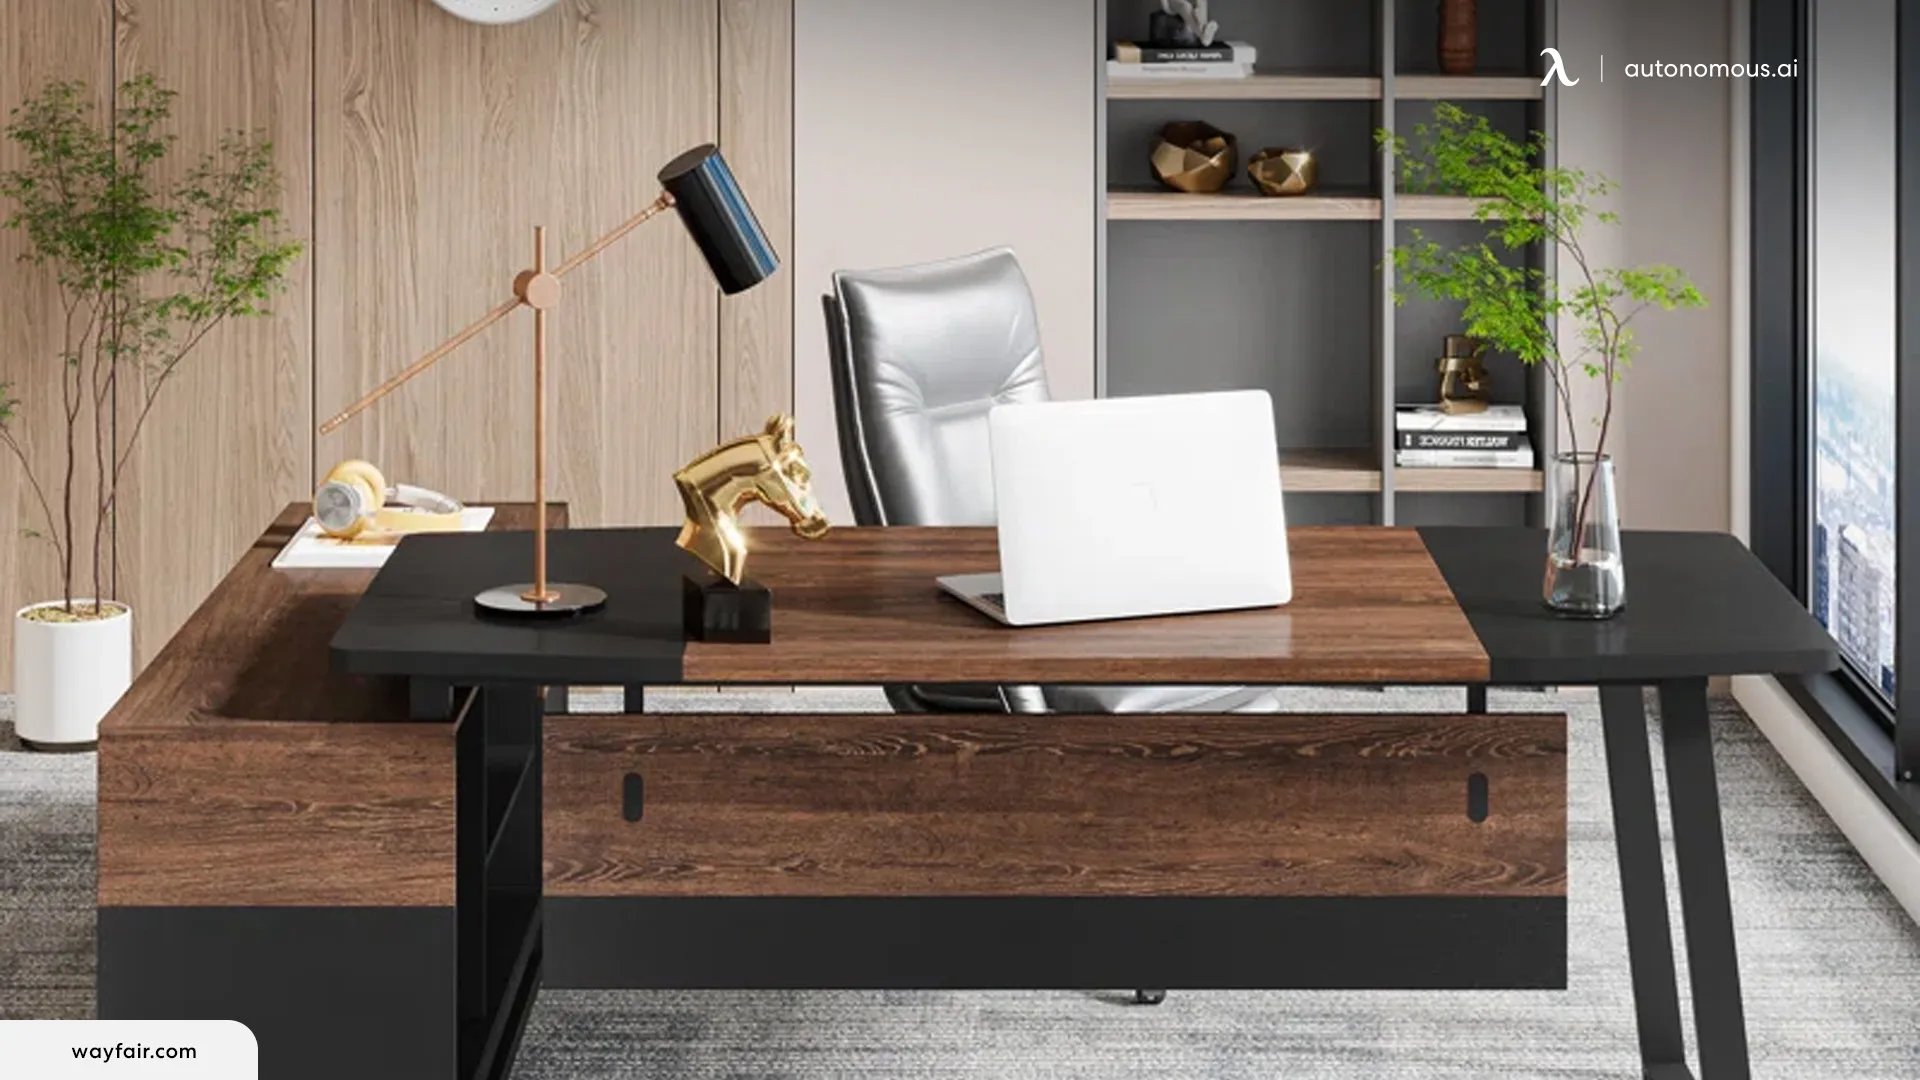 Minimize Distractions - High-end office desk